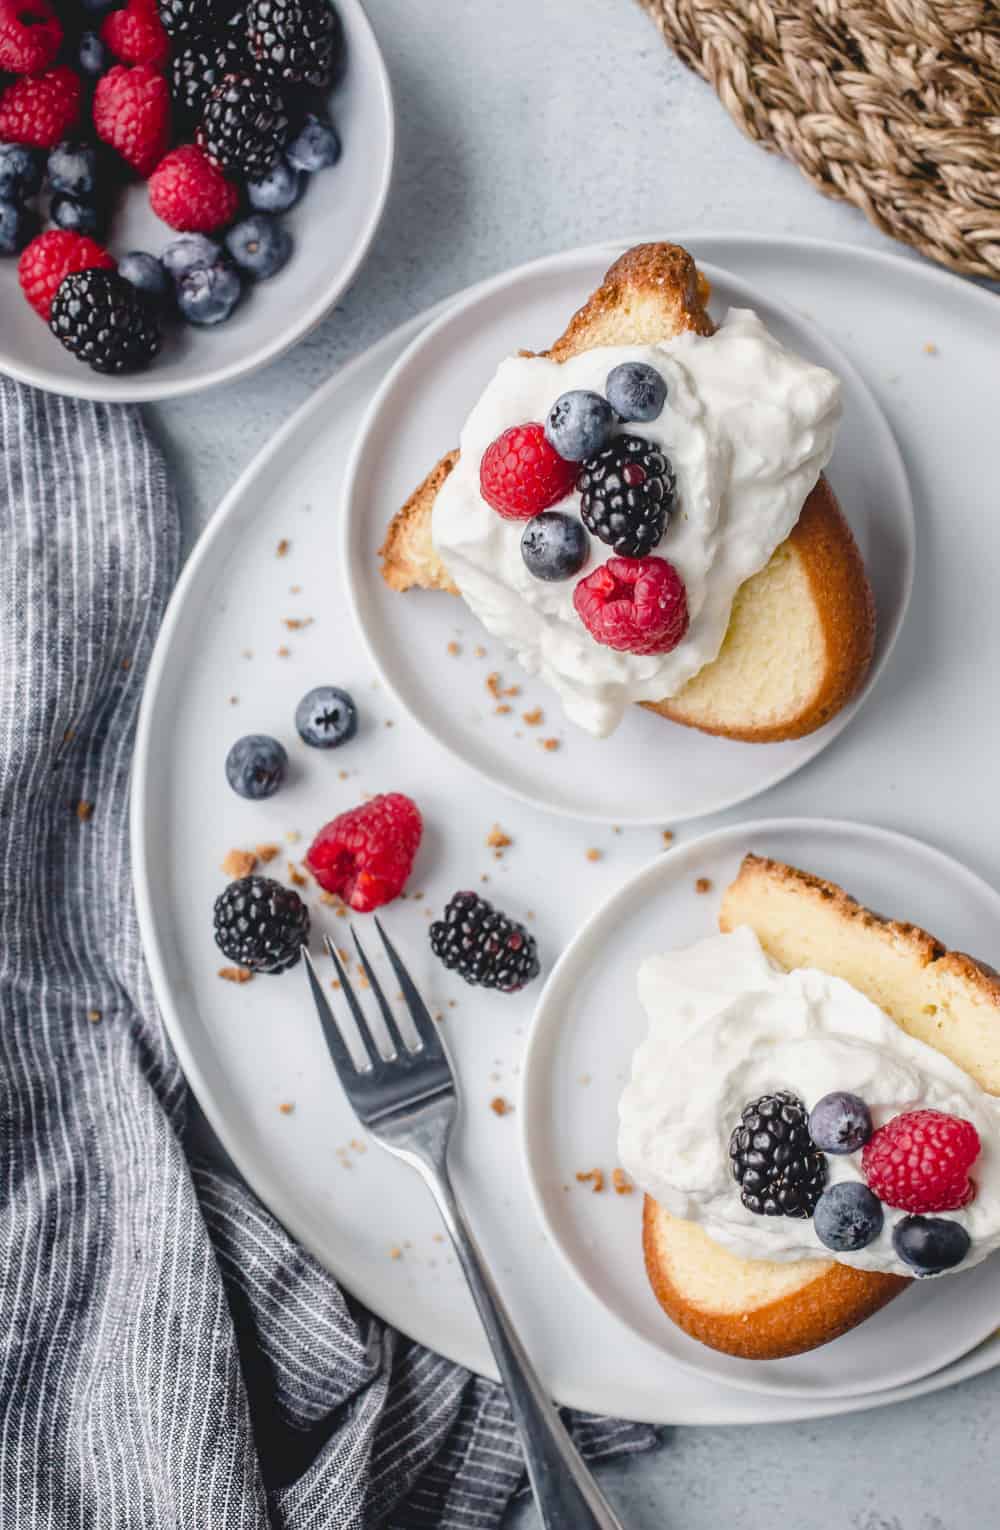 Two slices of 7up pound cake on white plates, topped with whipped cream and fresh berries